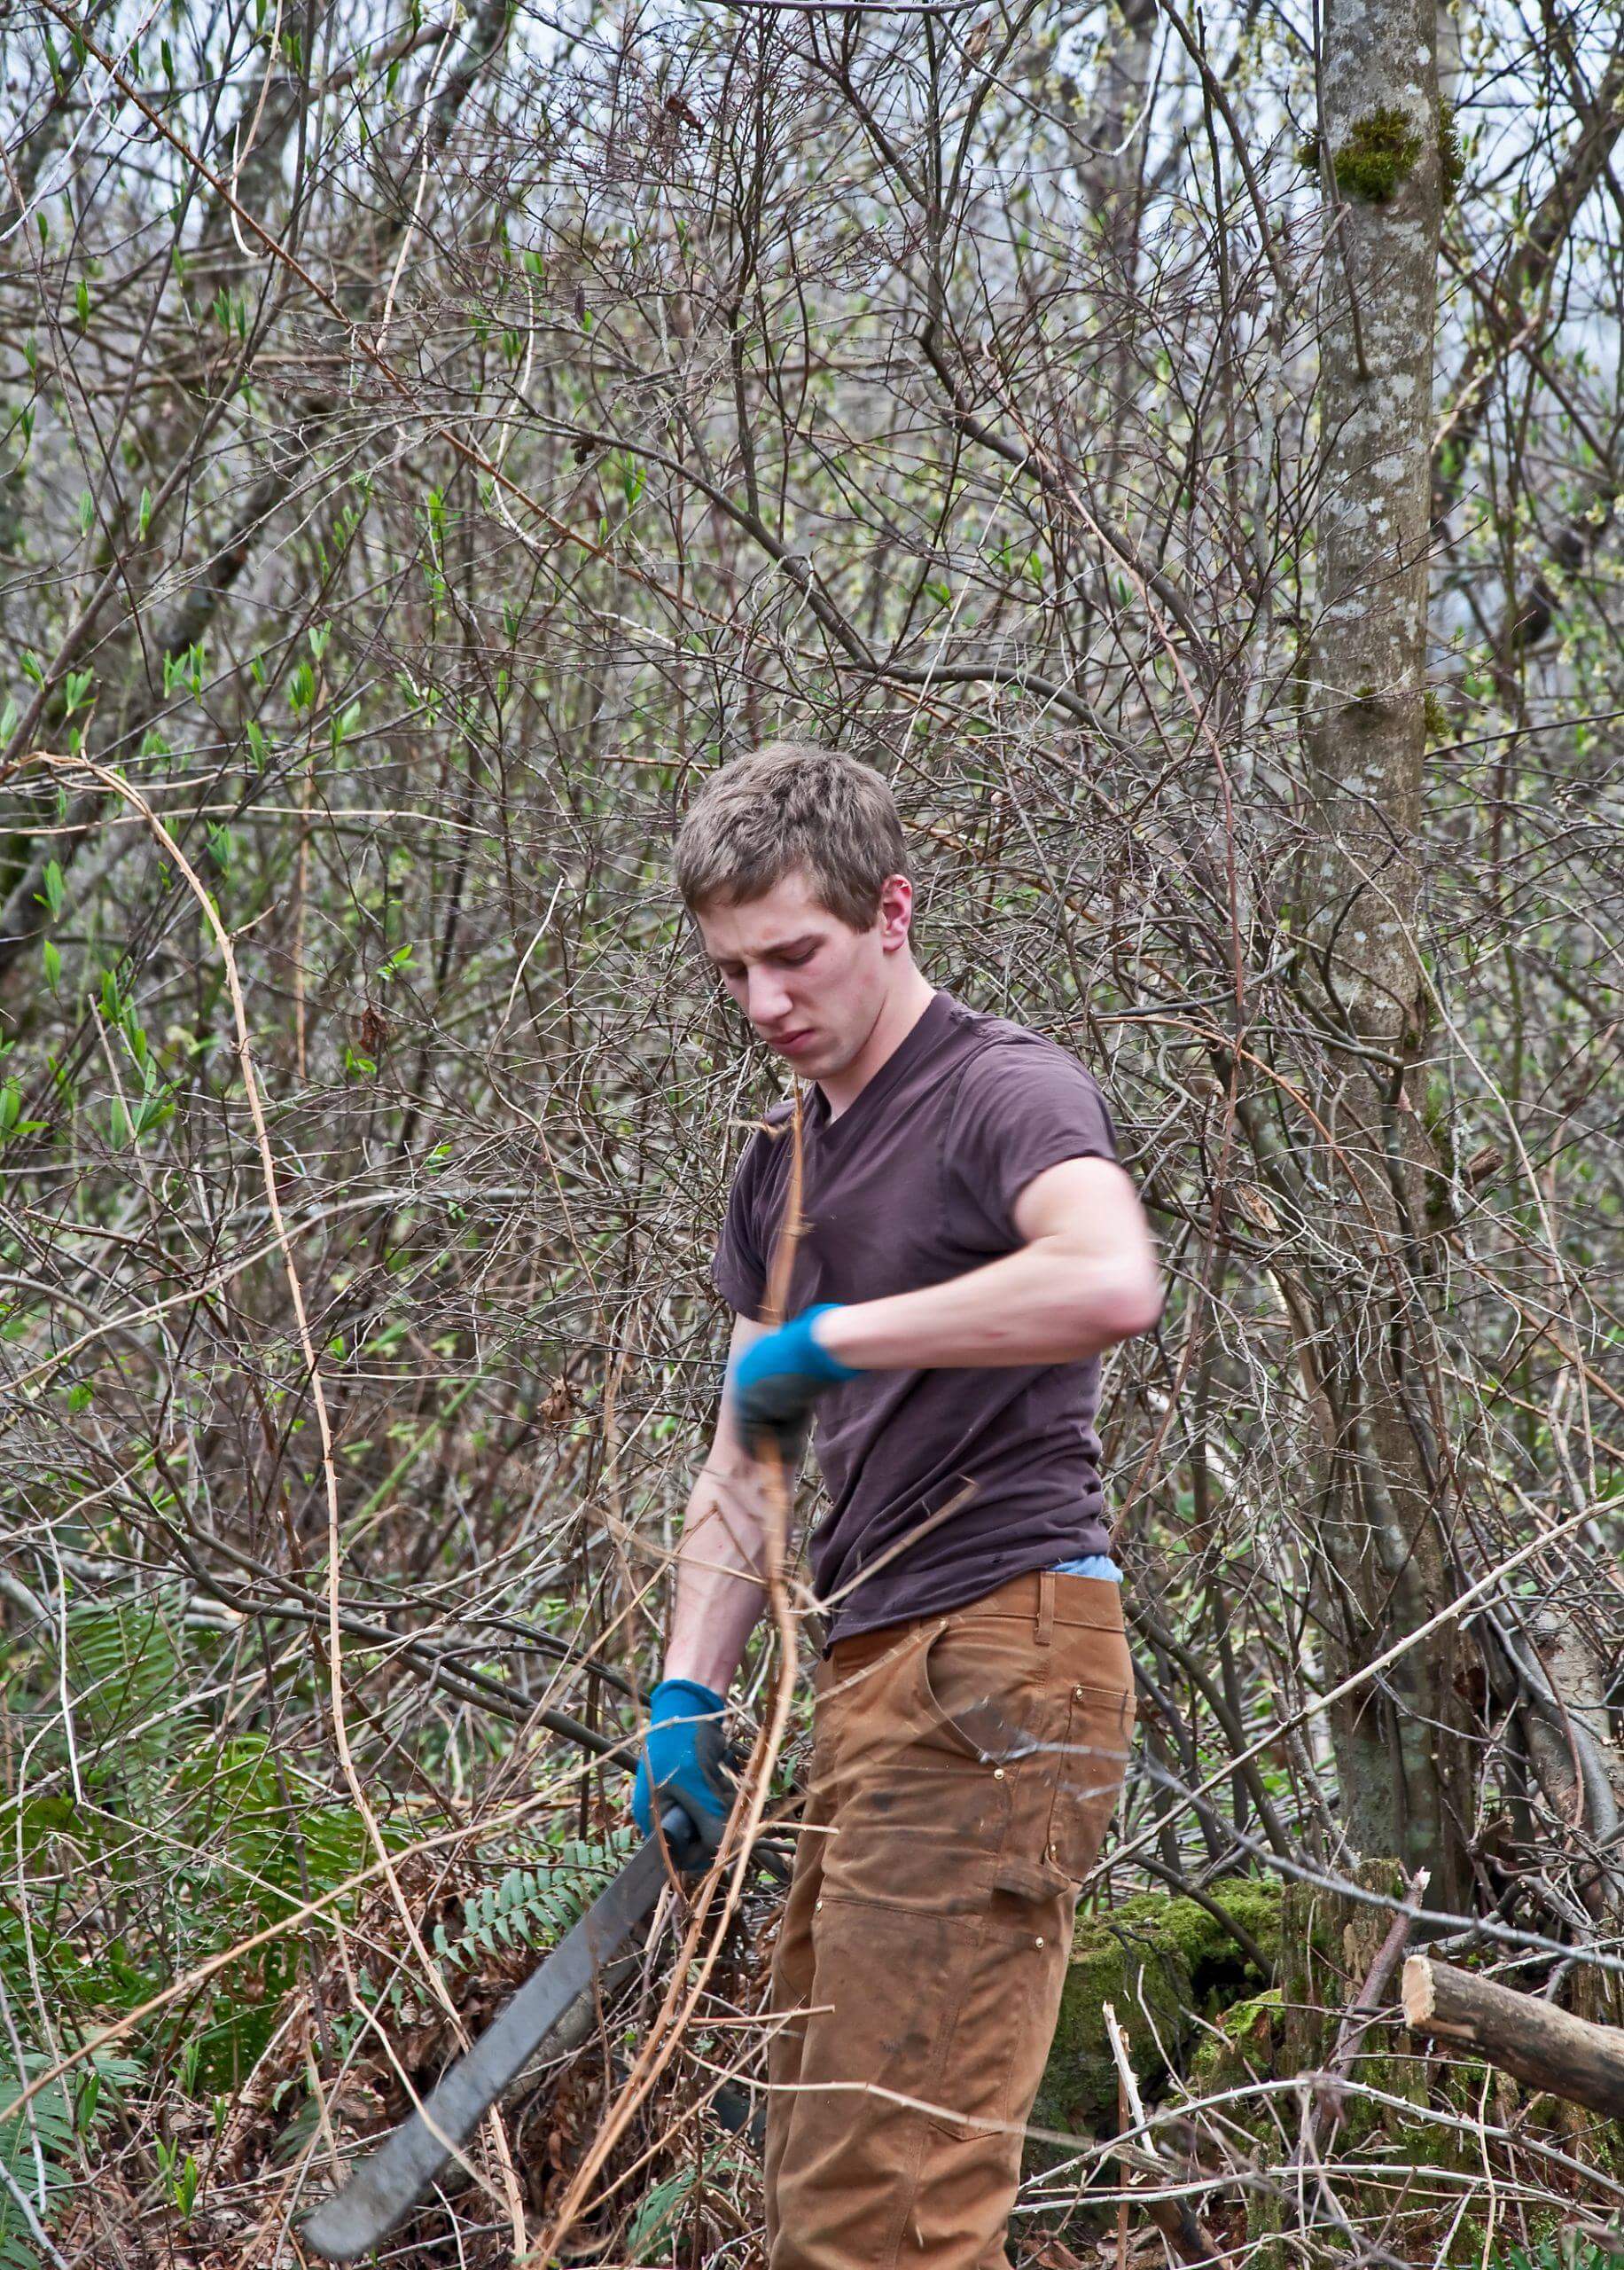 Young man clearing an area of brambles with a machete knife